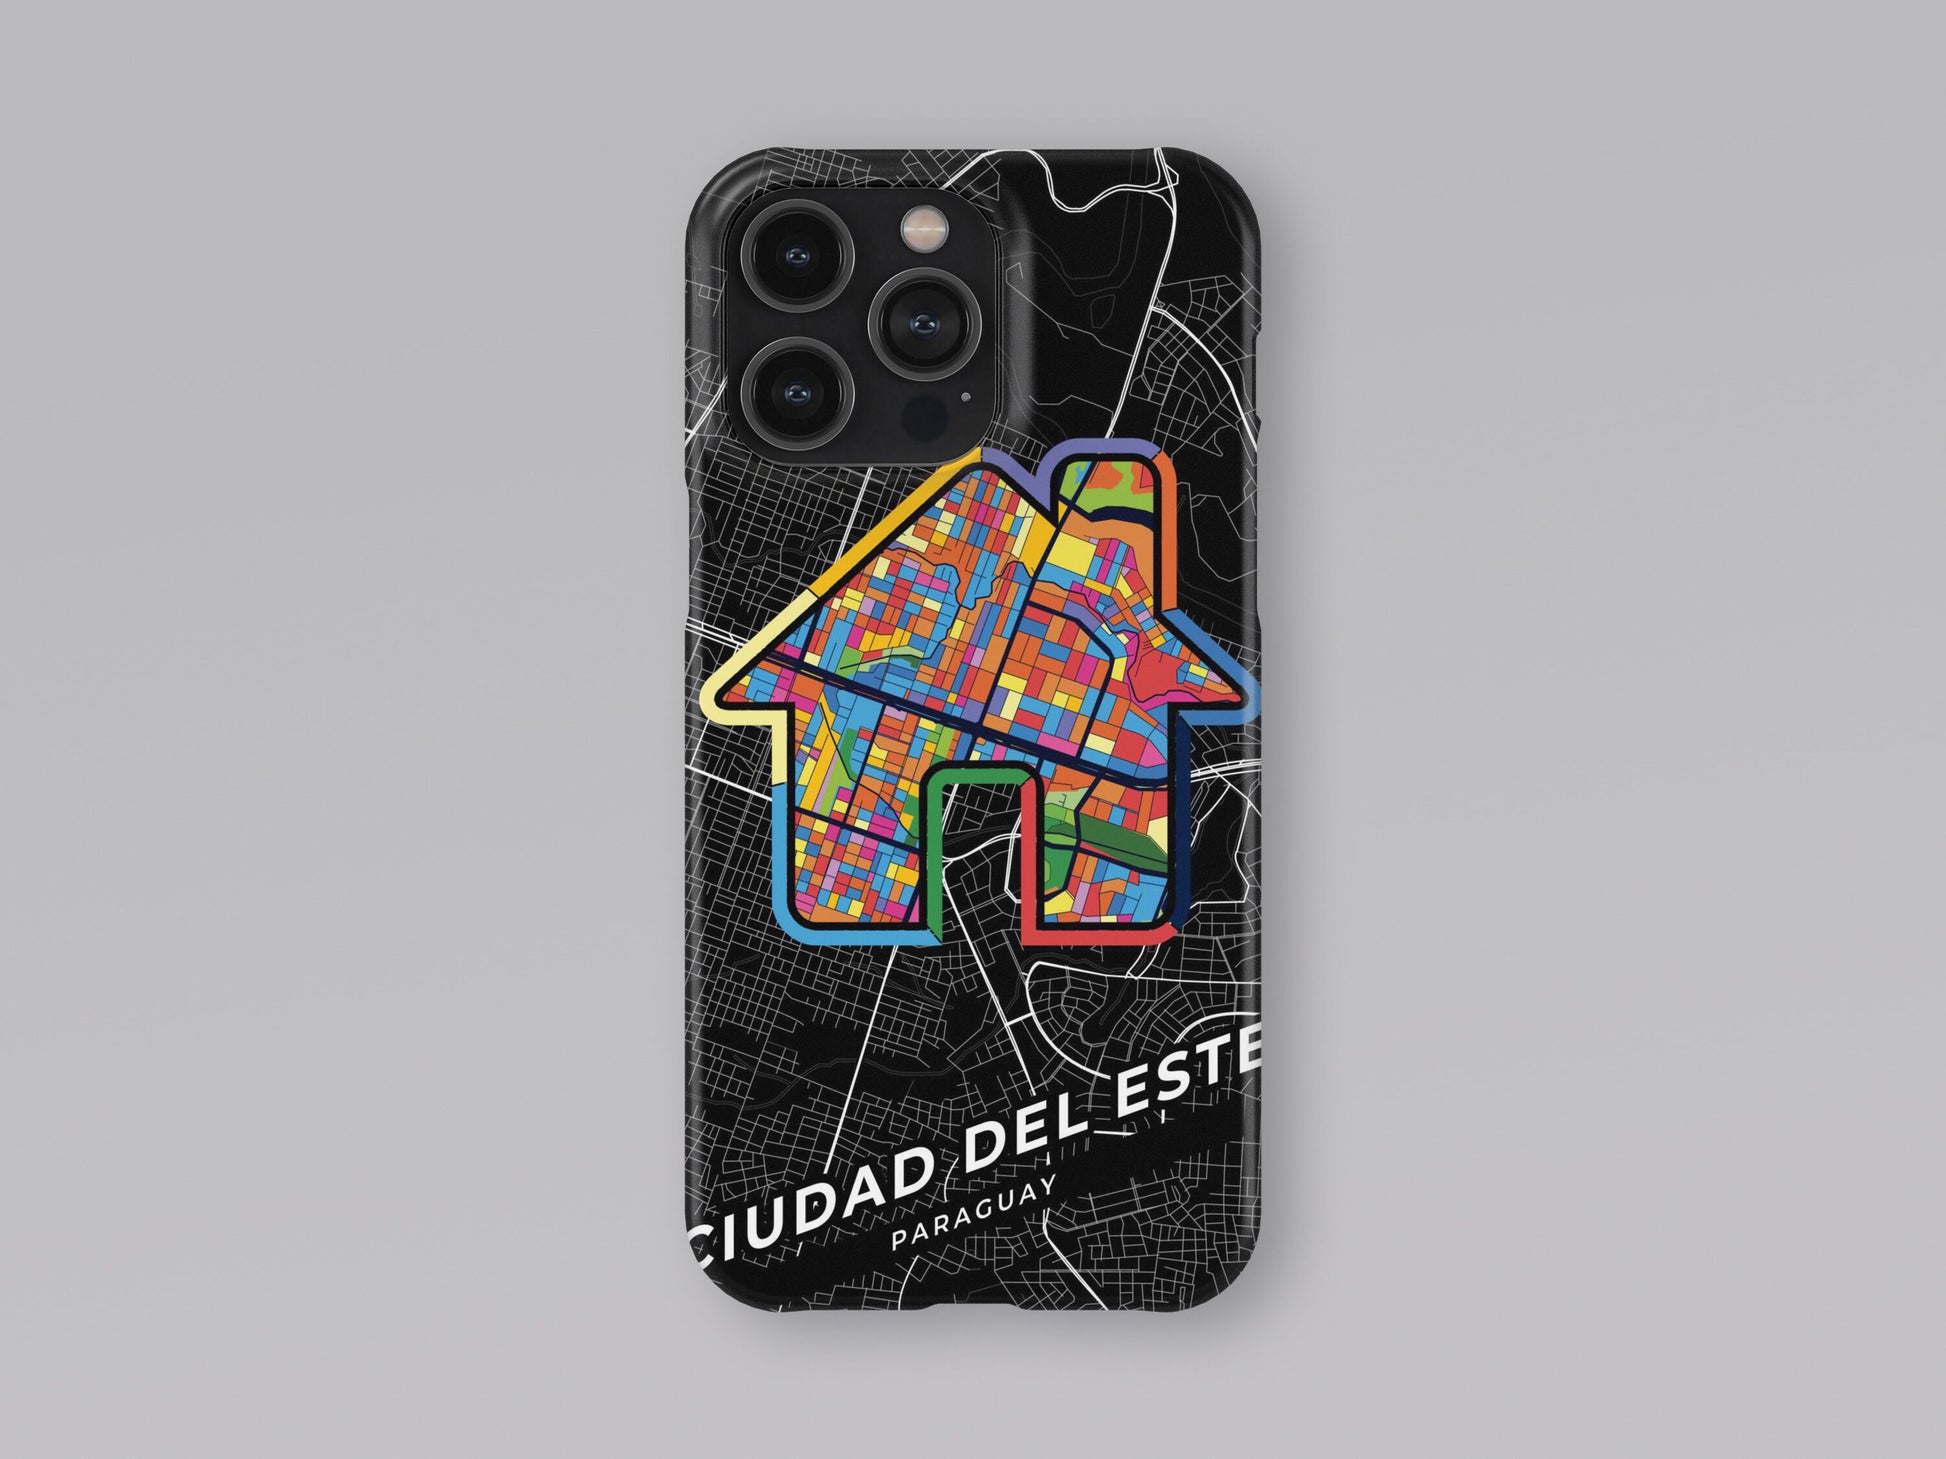 Ciudad Del Este Paraguay slim phone case with colorful icon. Birthday, wedding or housewarming gift. Couple match cases. 3